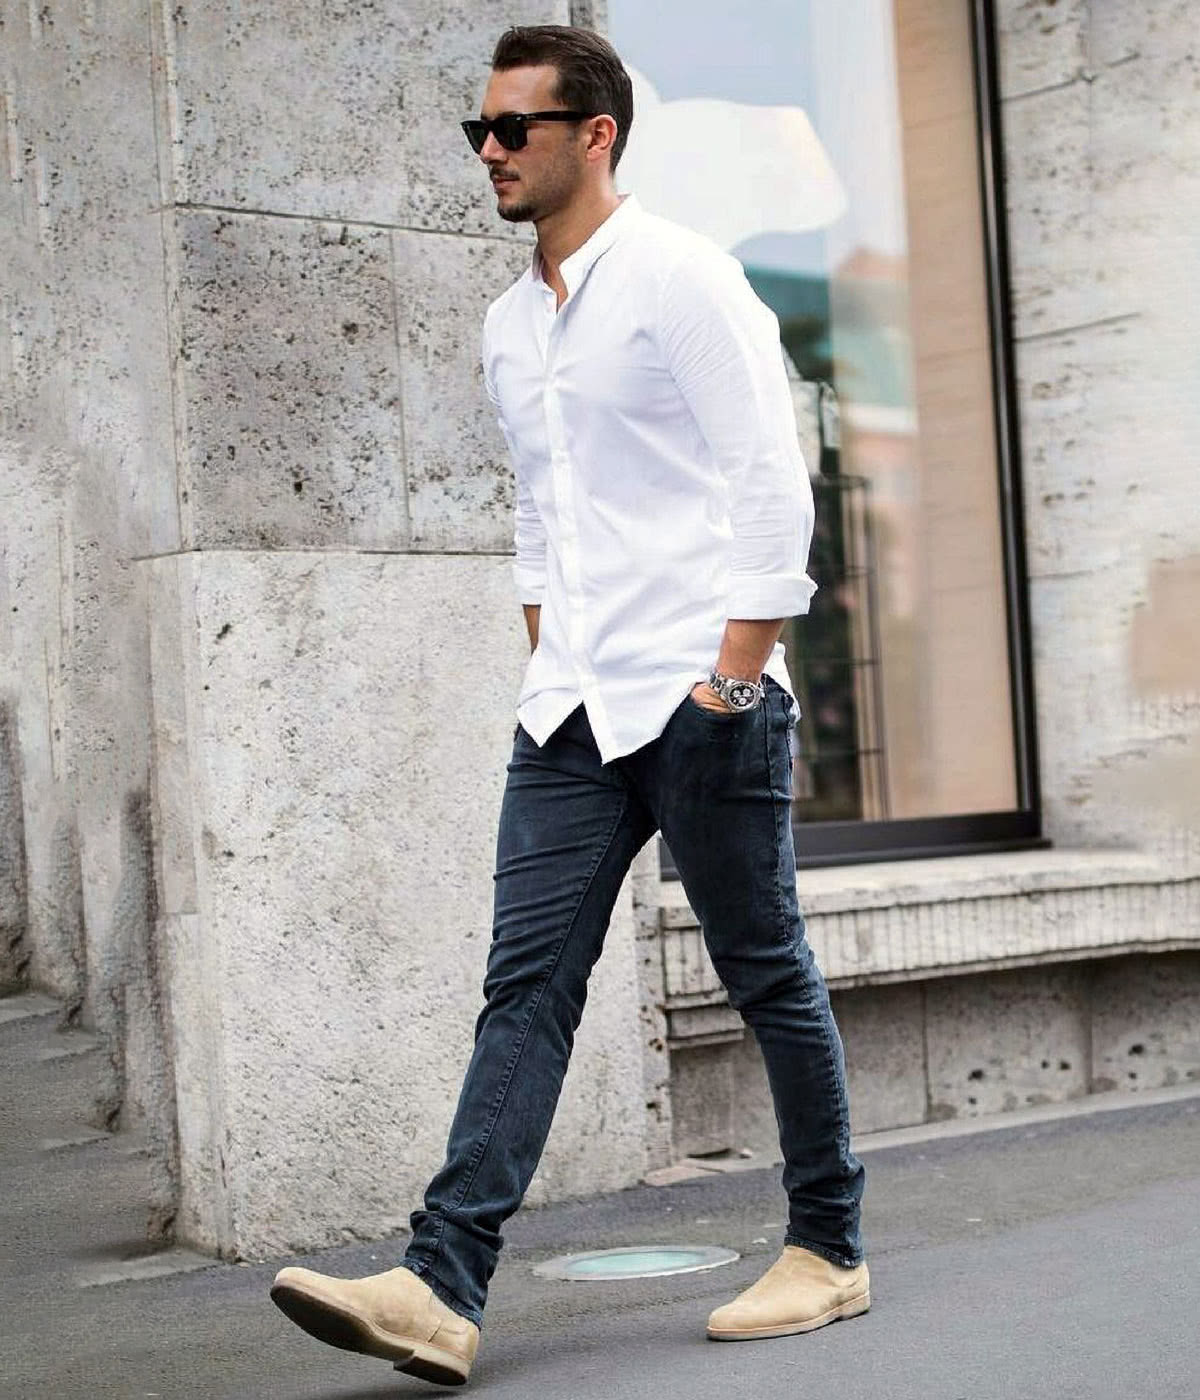 Some Fashion Style Tips Every Man Should Know